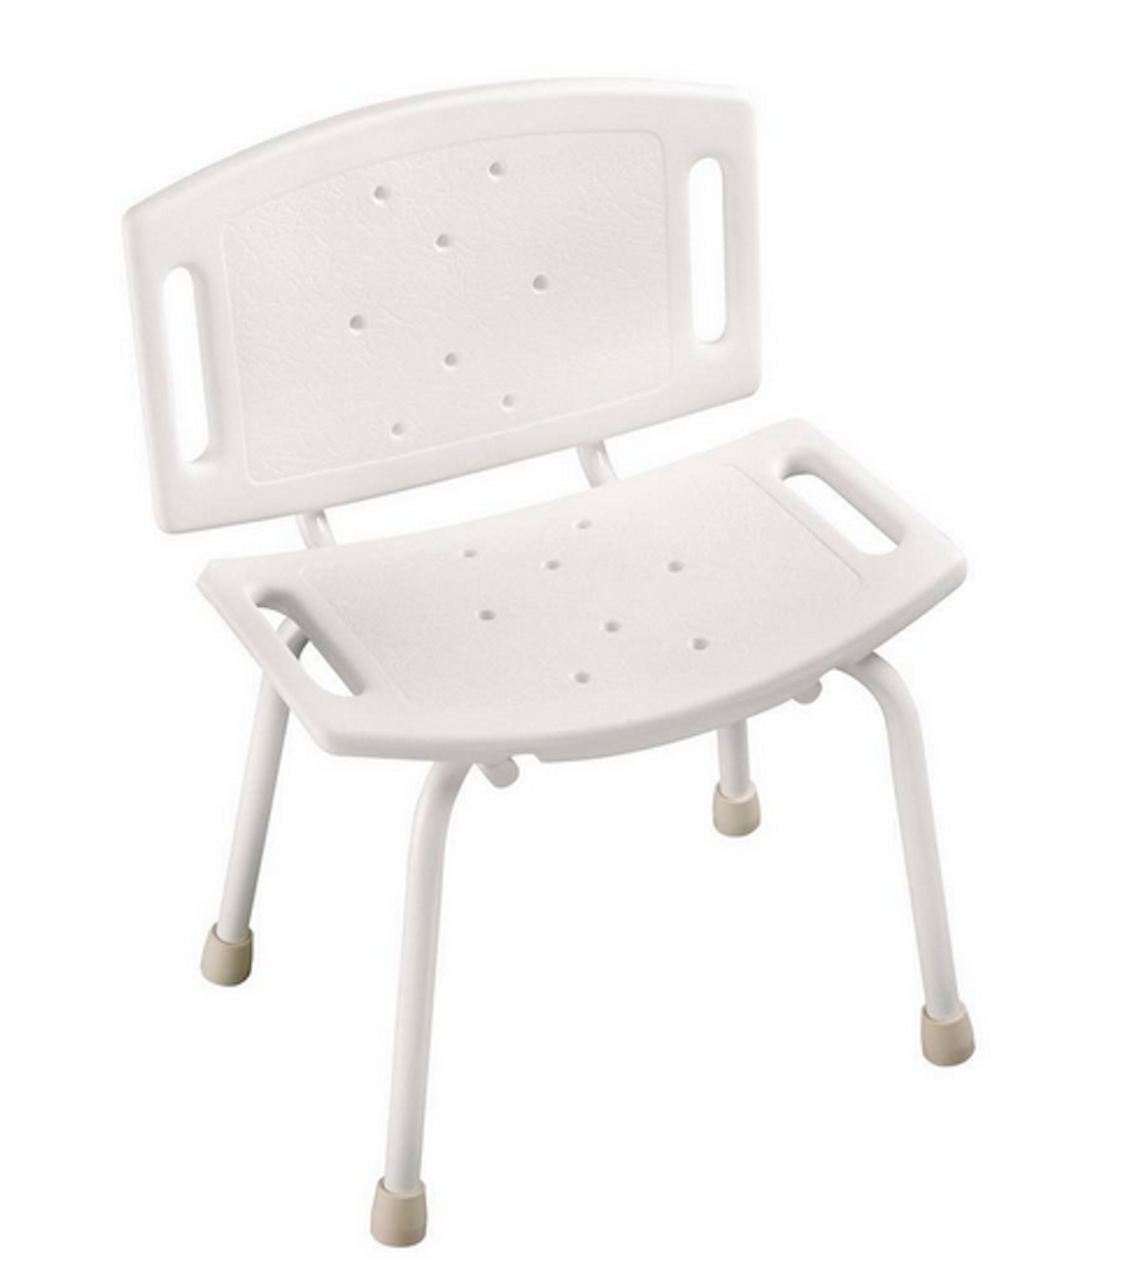 Delta DF598 Bath Safety Tub and Shower Chair White